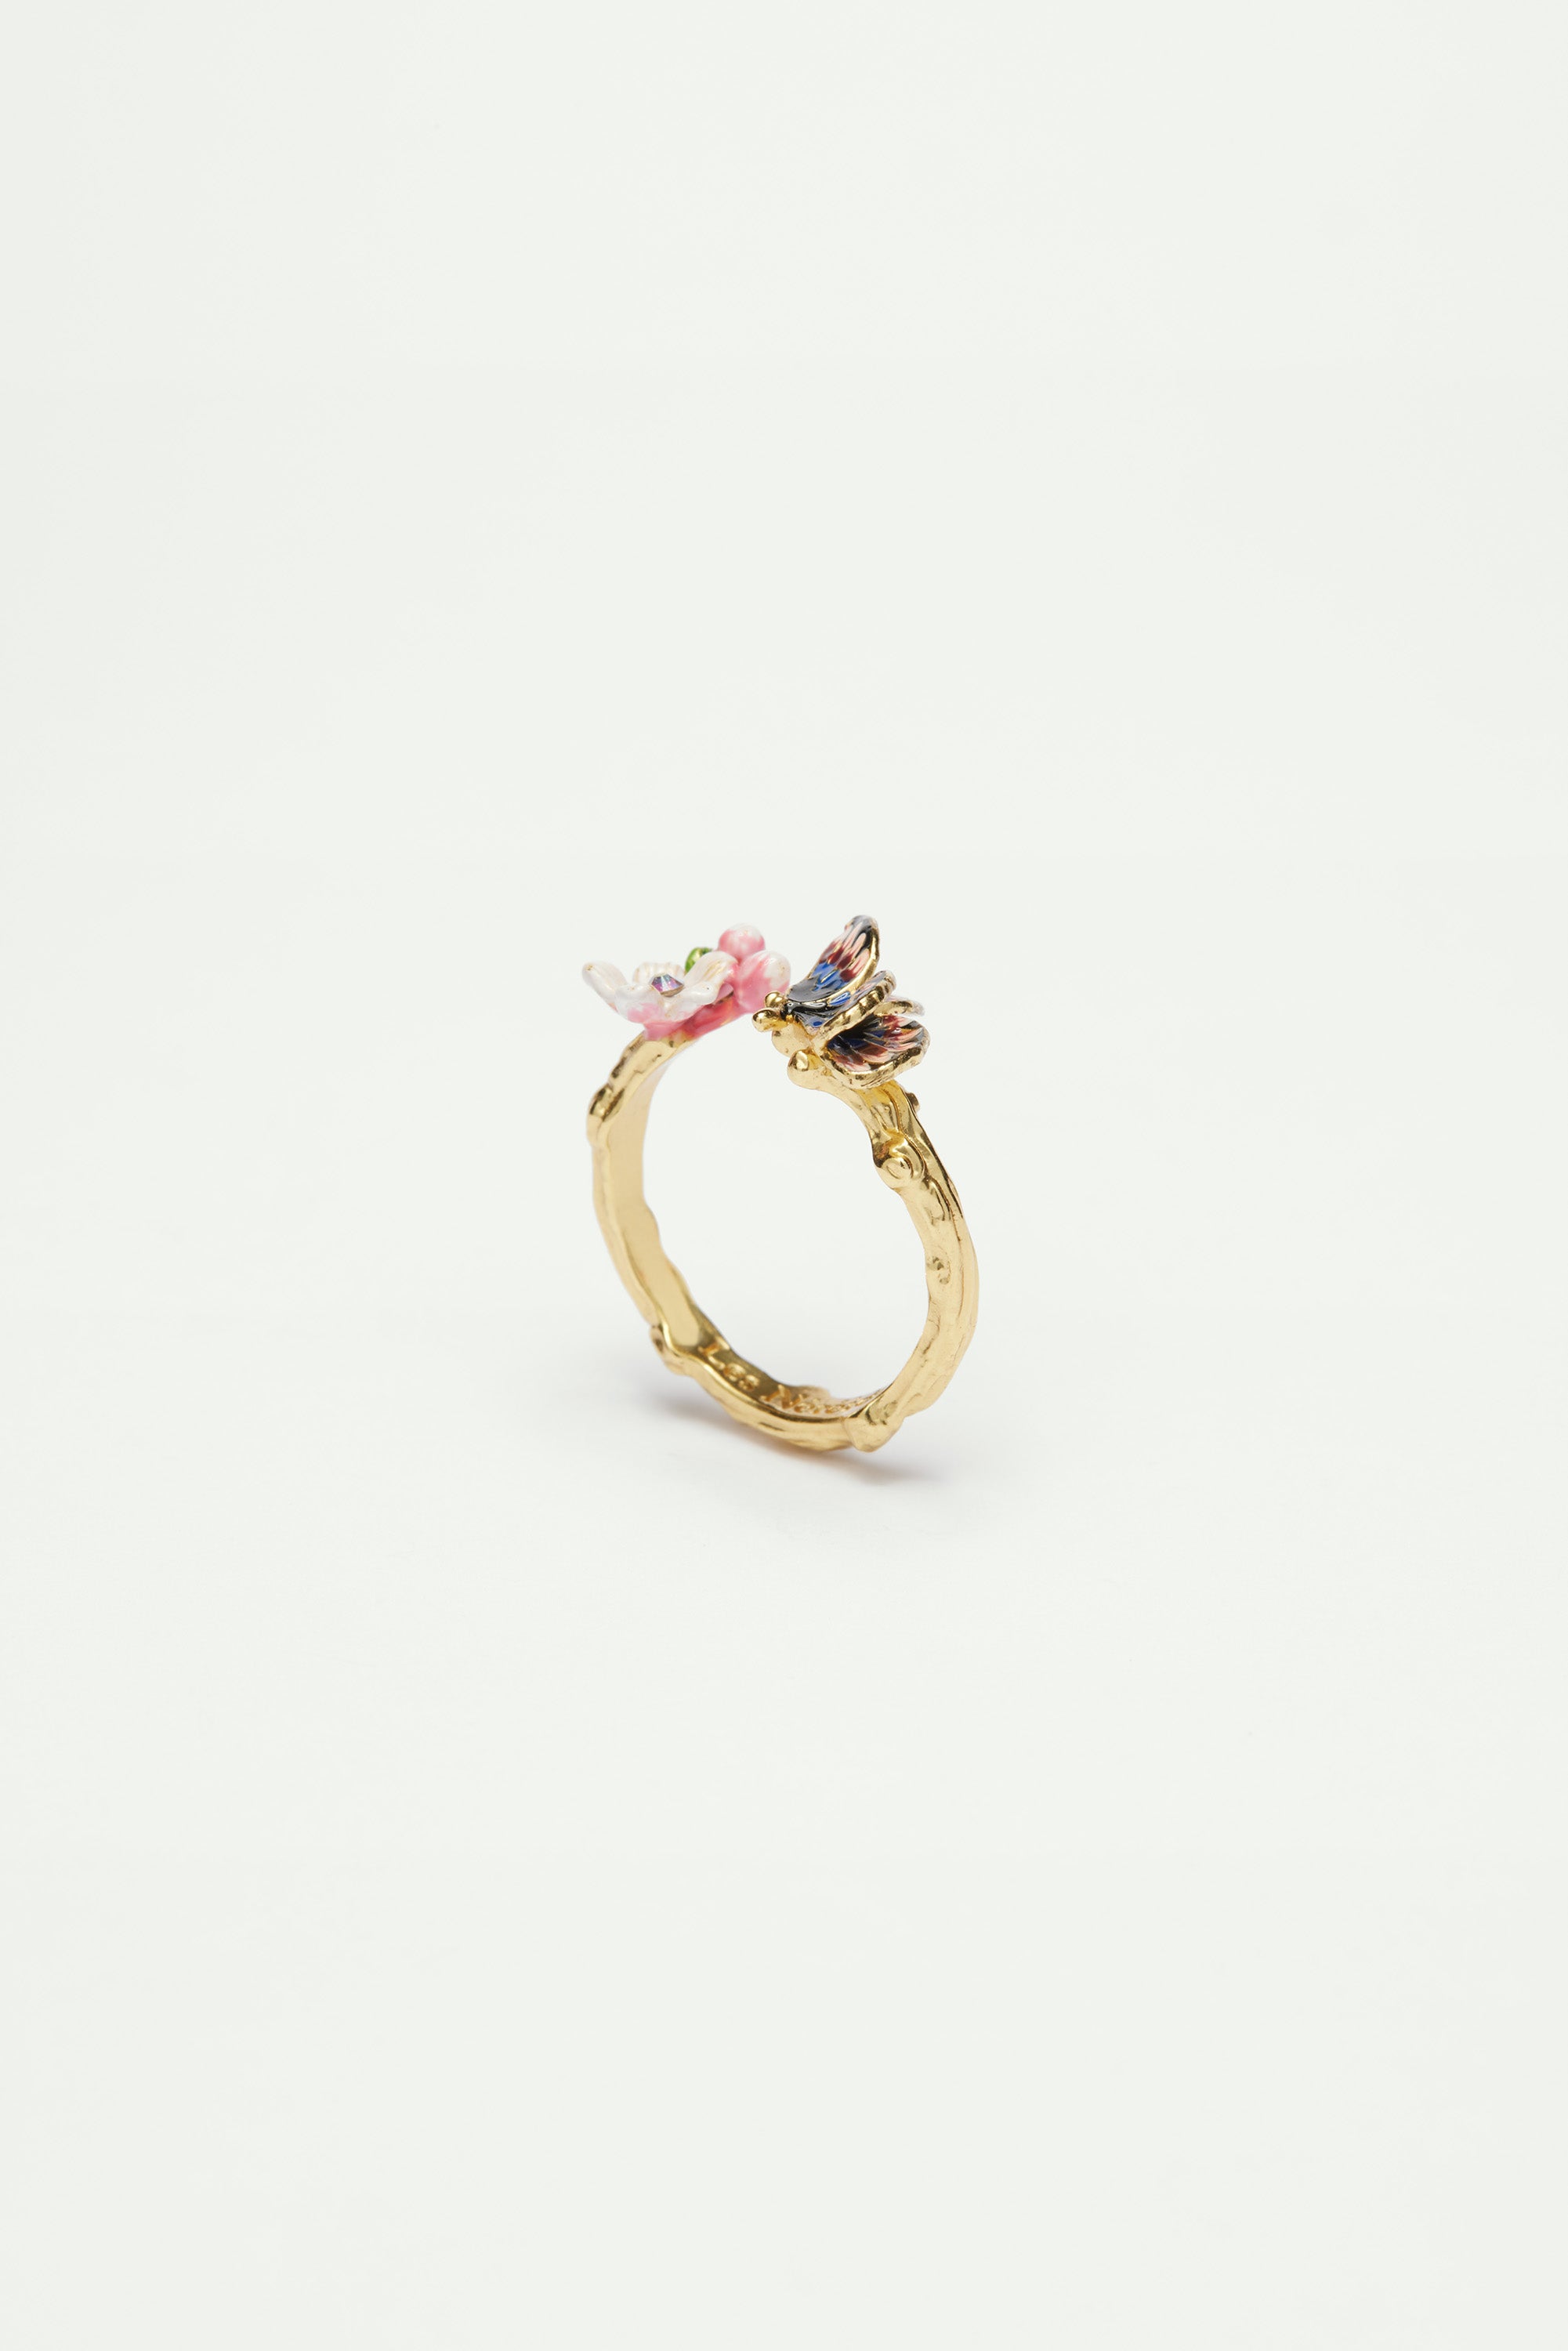 Japanese emperor butterfly and cherry blossom adjustable ring